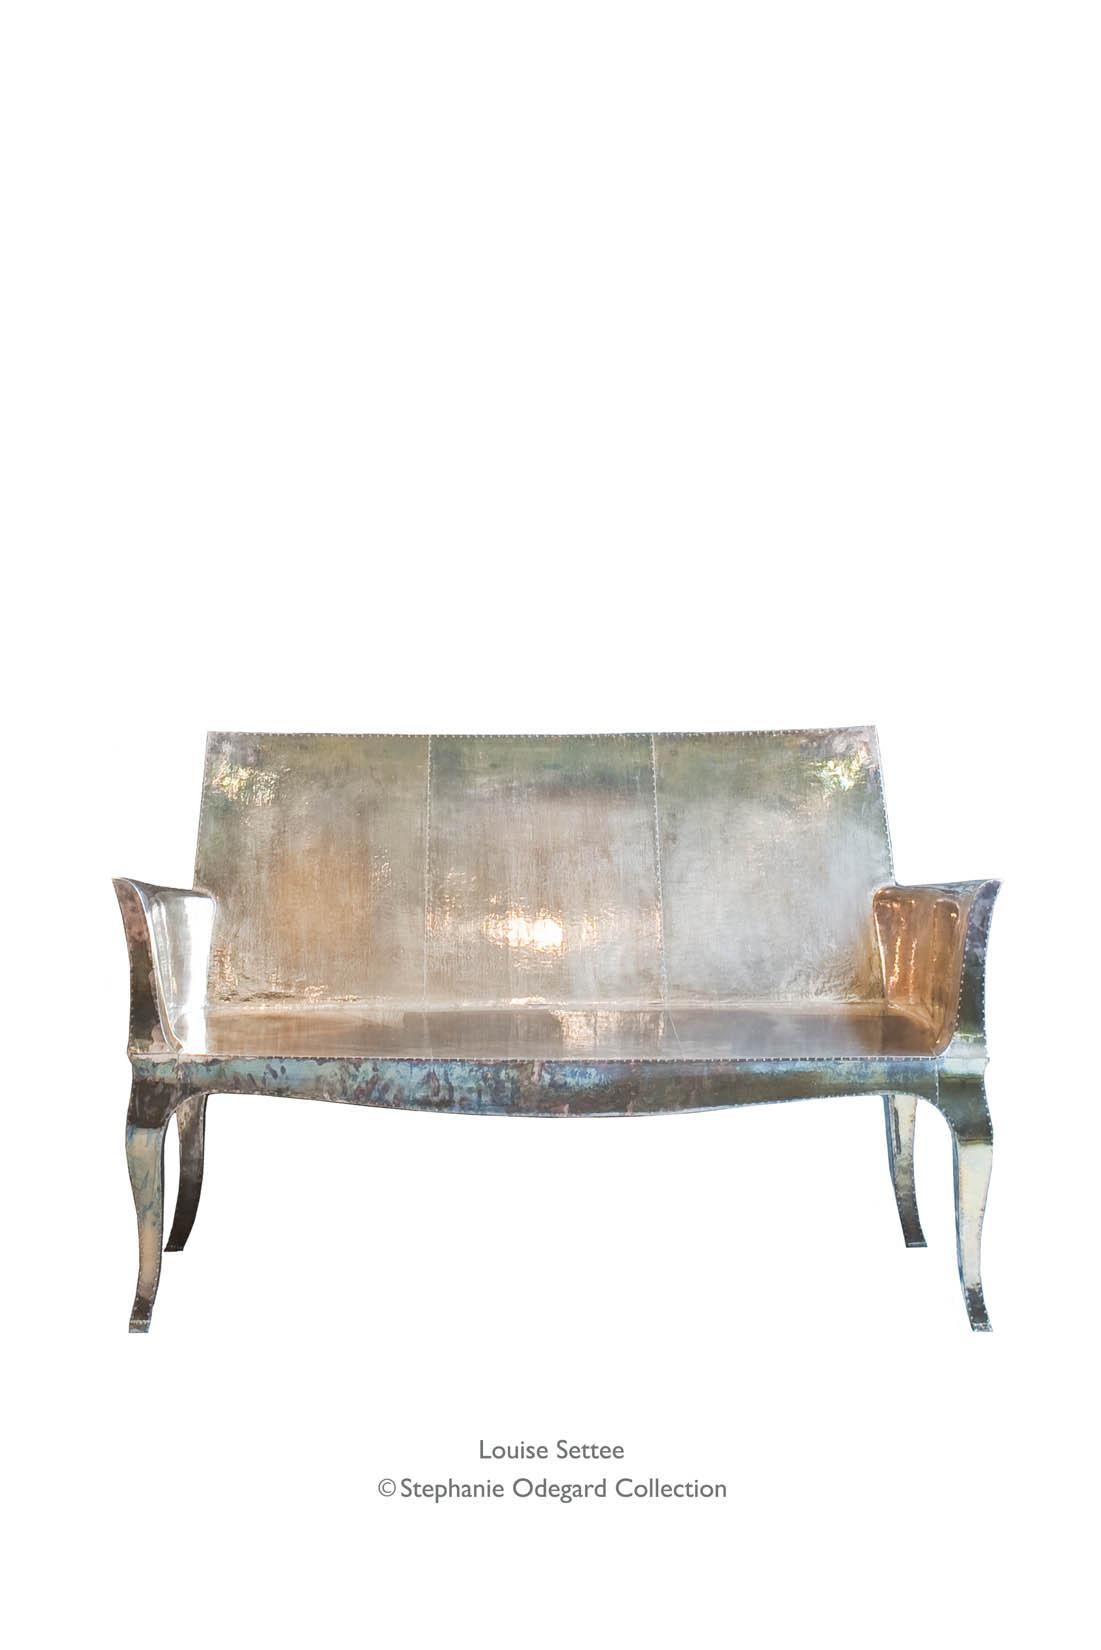 Louise Settee Art Deco Chaise Longues in Fine Hammered Copper by Paul Mathieu For Sale 6